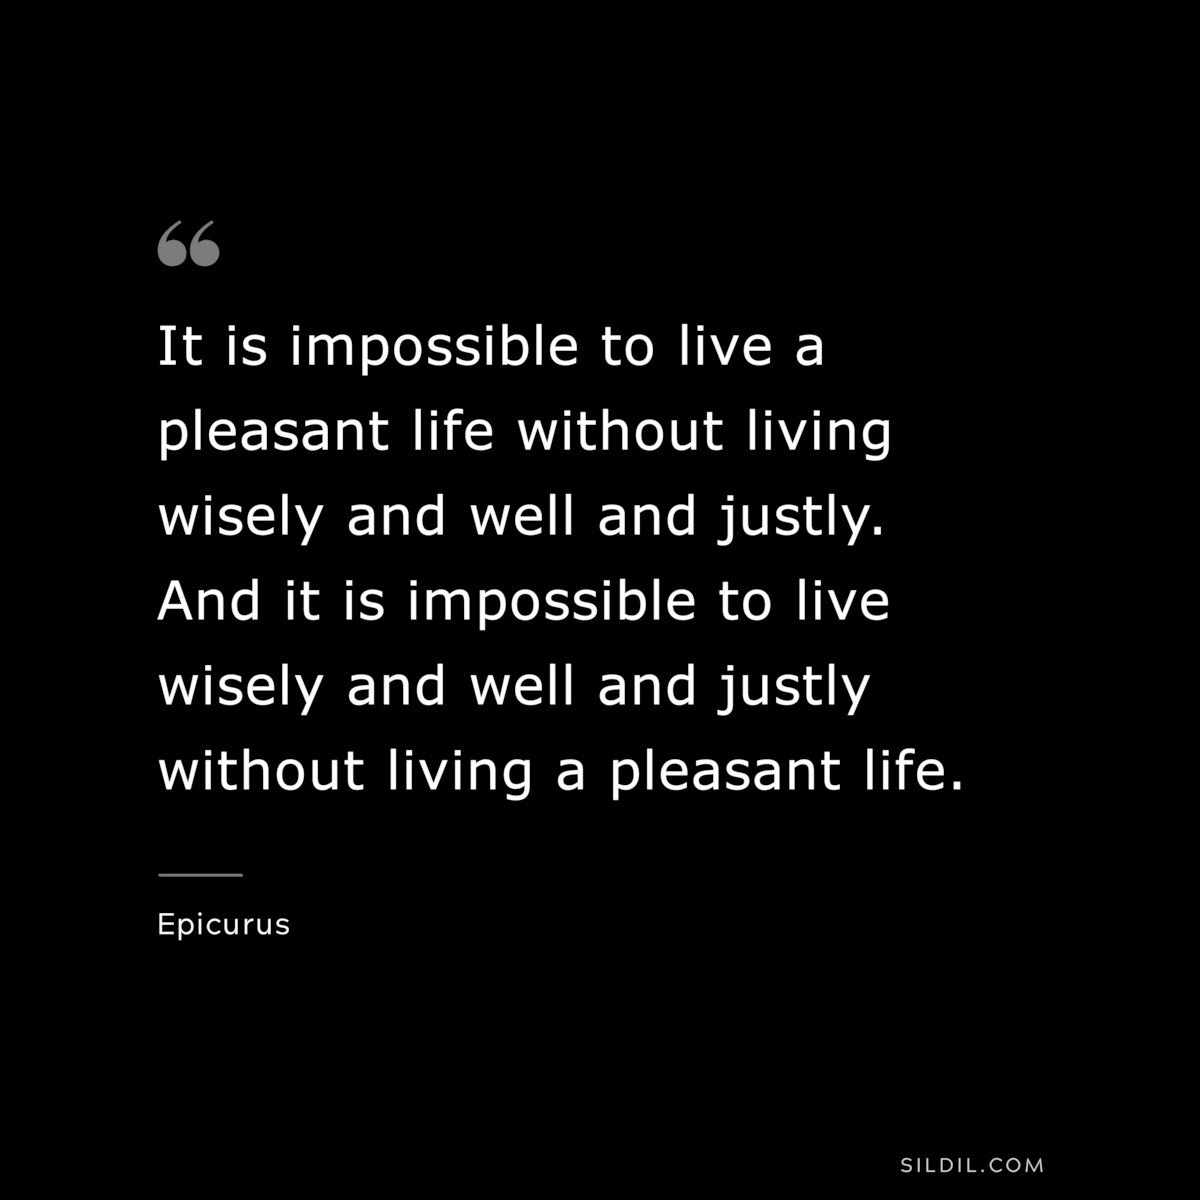 It is impossible to live a pleasant life without living wisely and well and justly. And it is impossible to live wisely and well and justly without living a pleasant life. — Epicurus